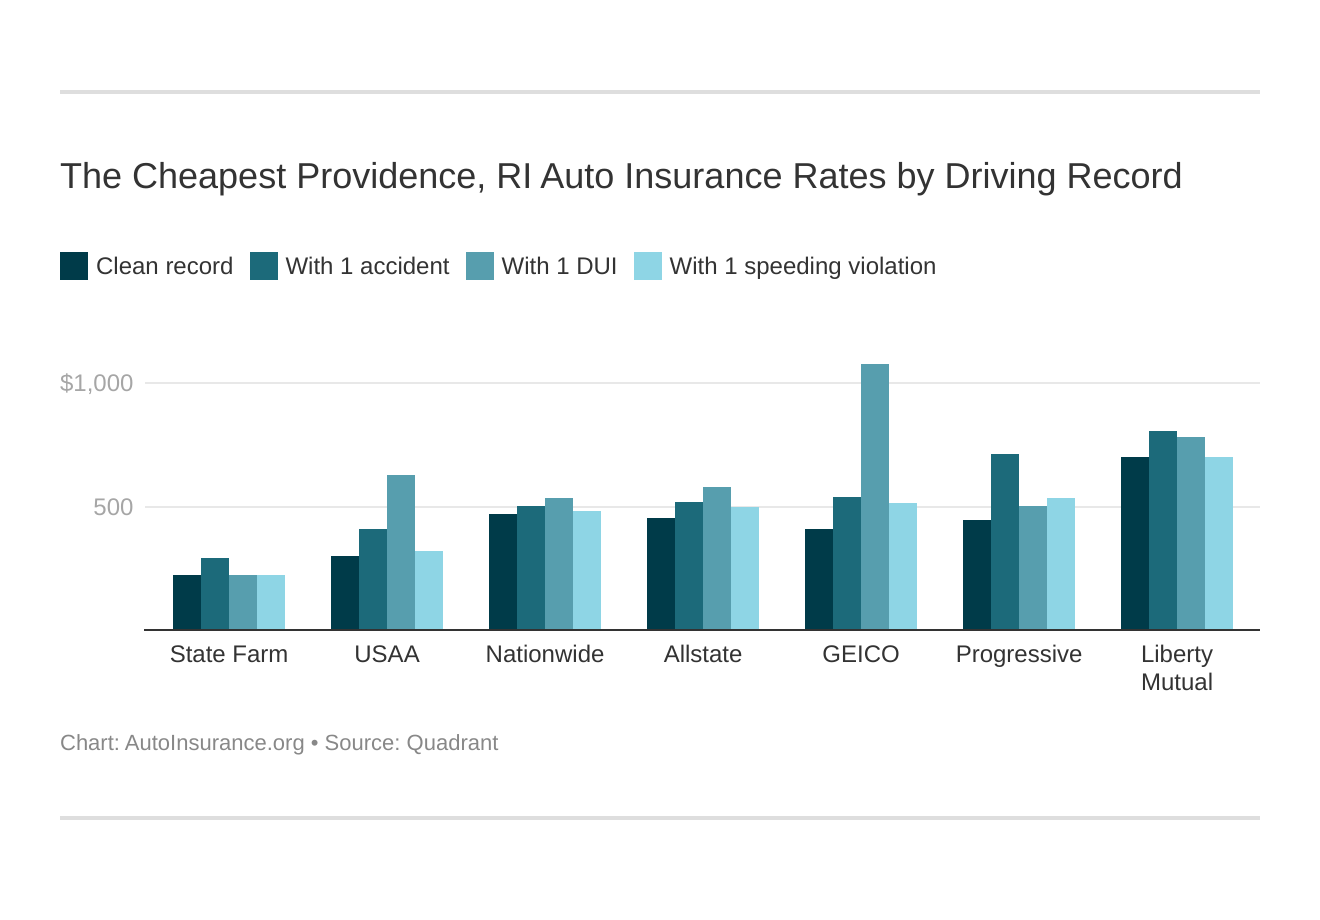 The Cheapest Providence, RI Auto Insurance Rates by Driving Record